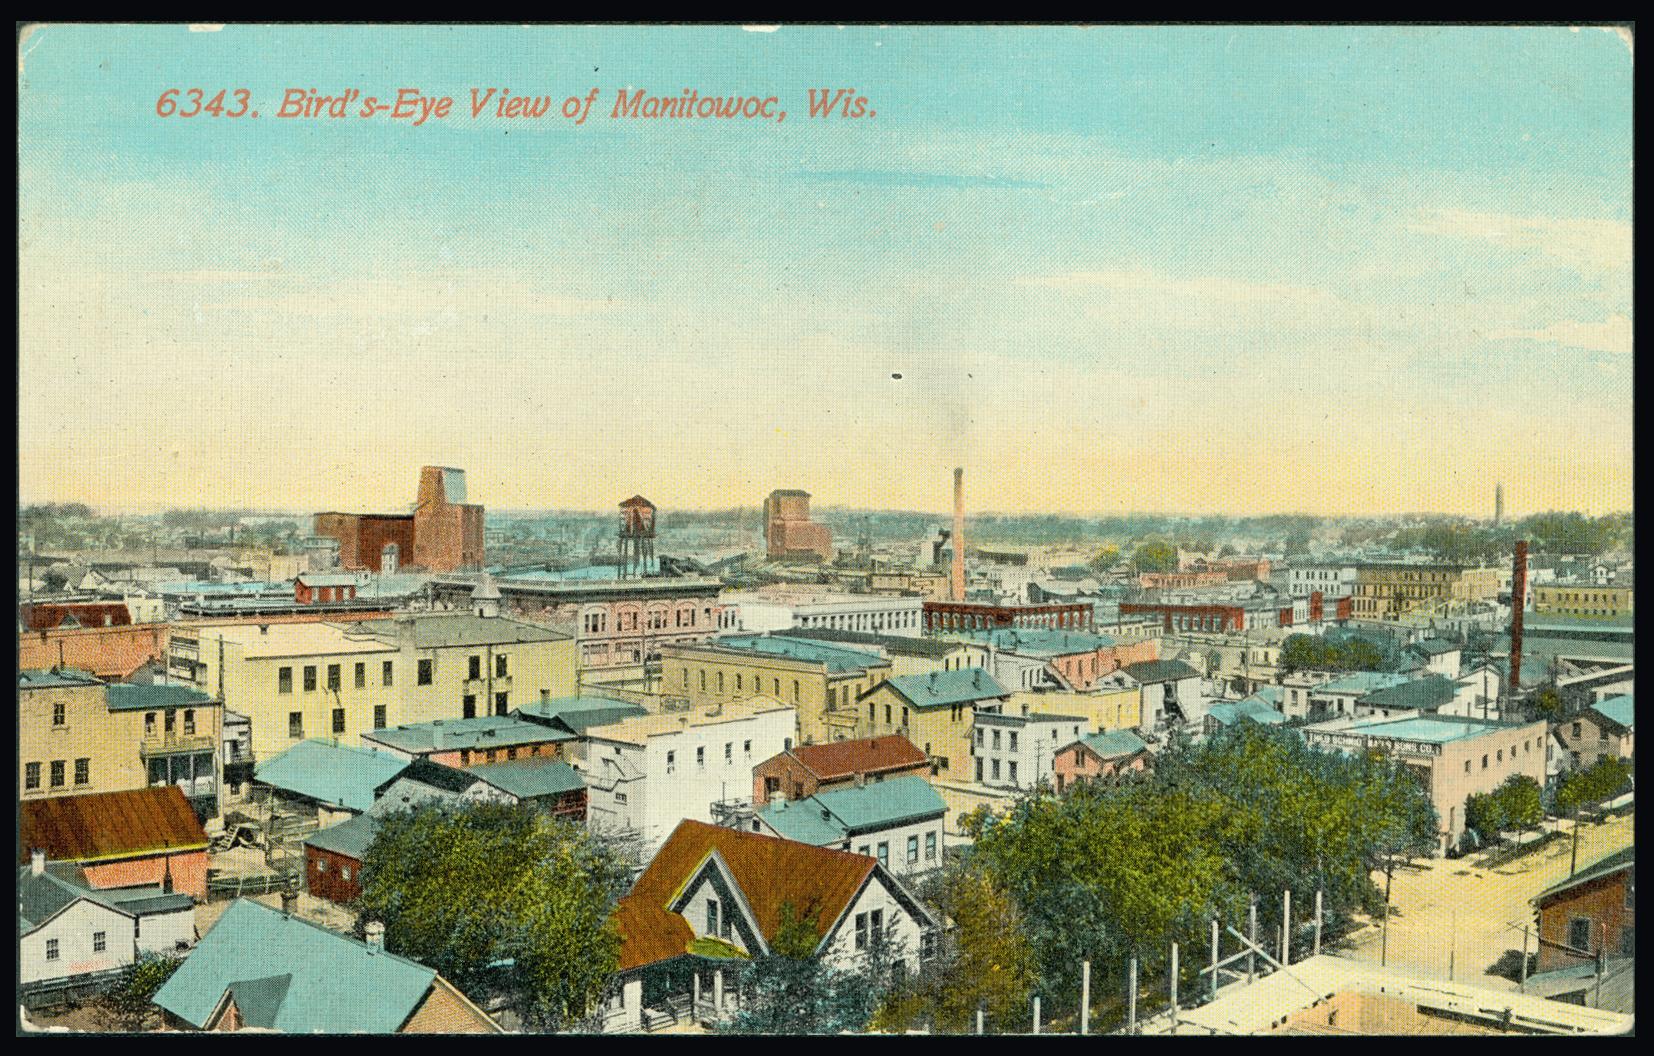 "Bird's-Eye View of Manitowoc, Wis." This was probably taken on top of Rahr Malting looking over downtown Manitowoc. You can see Theo. Schmidtman & Sons on the right side which is located on Jay and 7th Streets. The pink building just left of center is Schuette's on Eighth Street. Postcard mailed 1912.